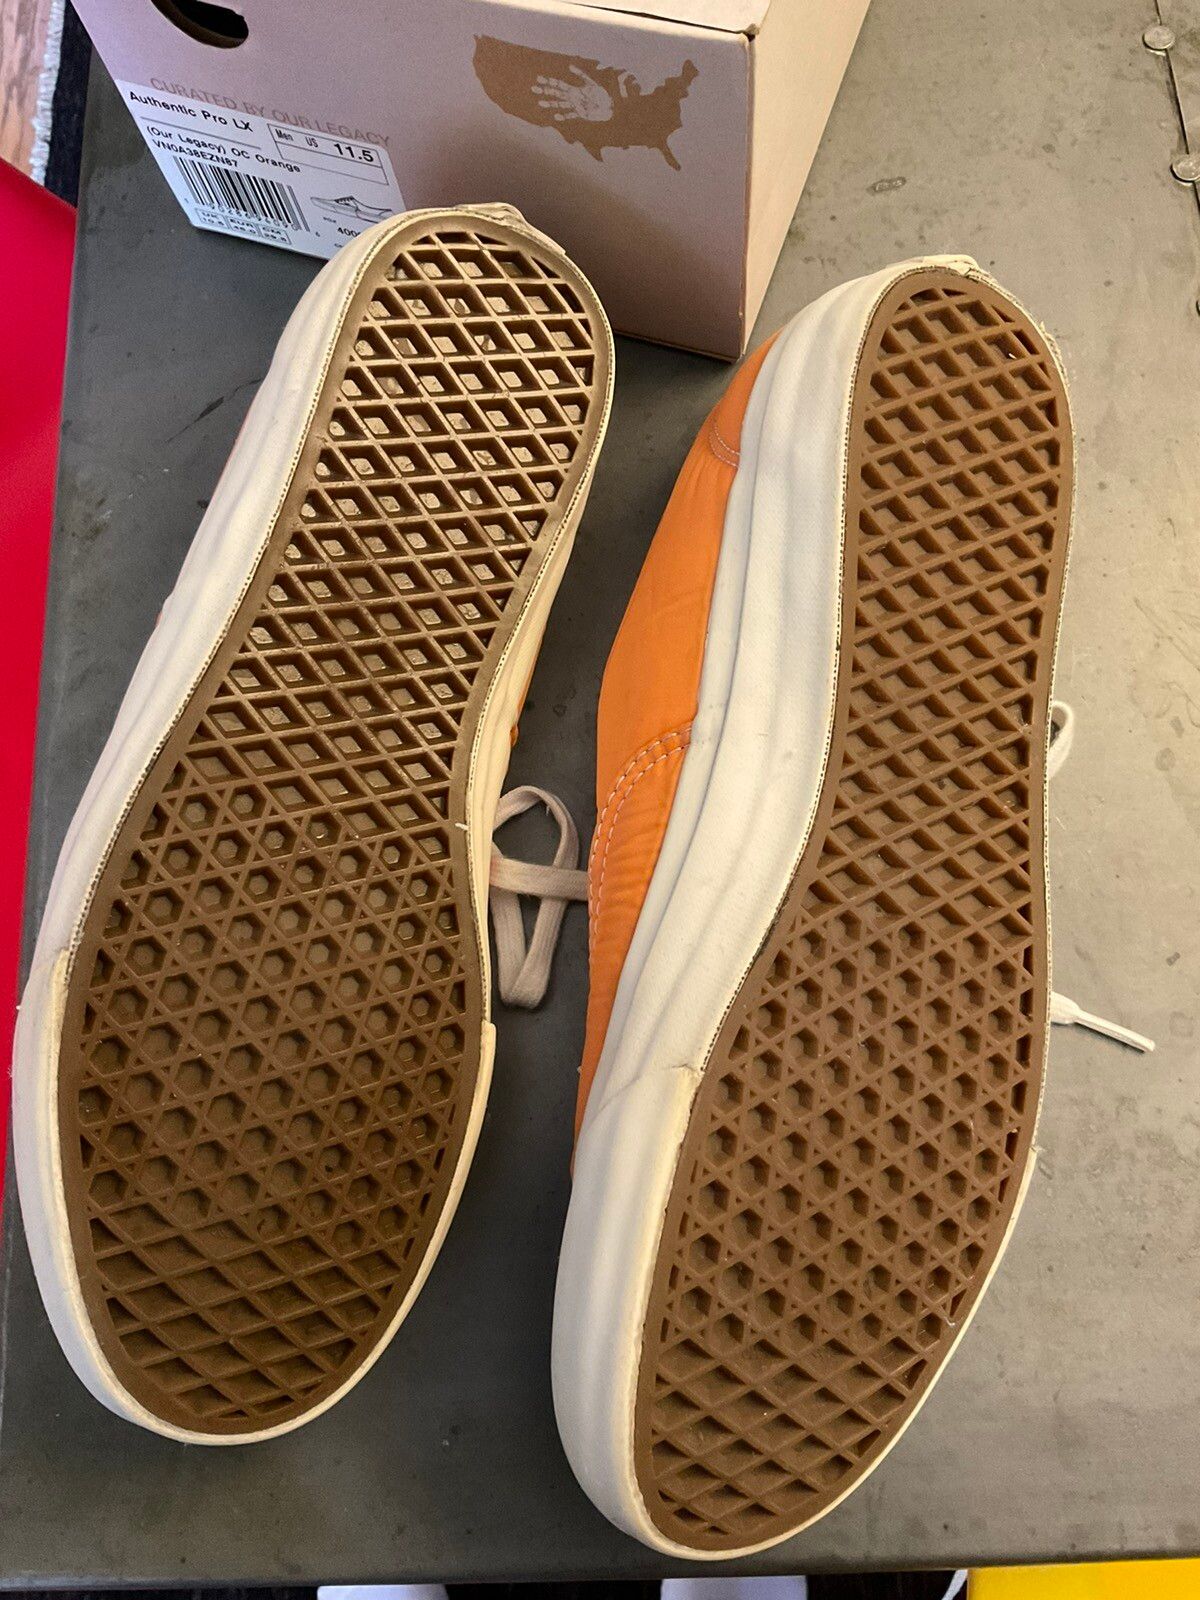 Our Legacy Vans / Our Legacy Authentic Pro LX in OC Orange Nylon Size US 11.5 / EU 44-45 - 6 Preview